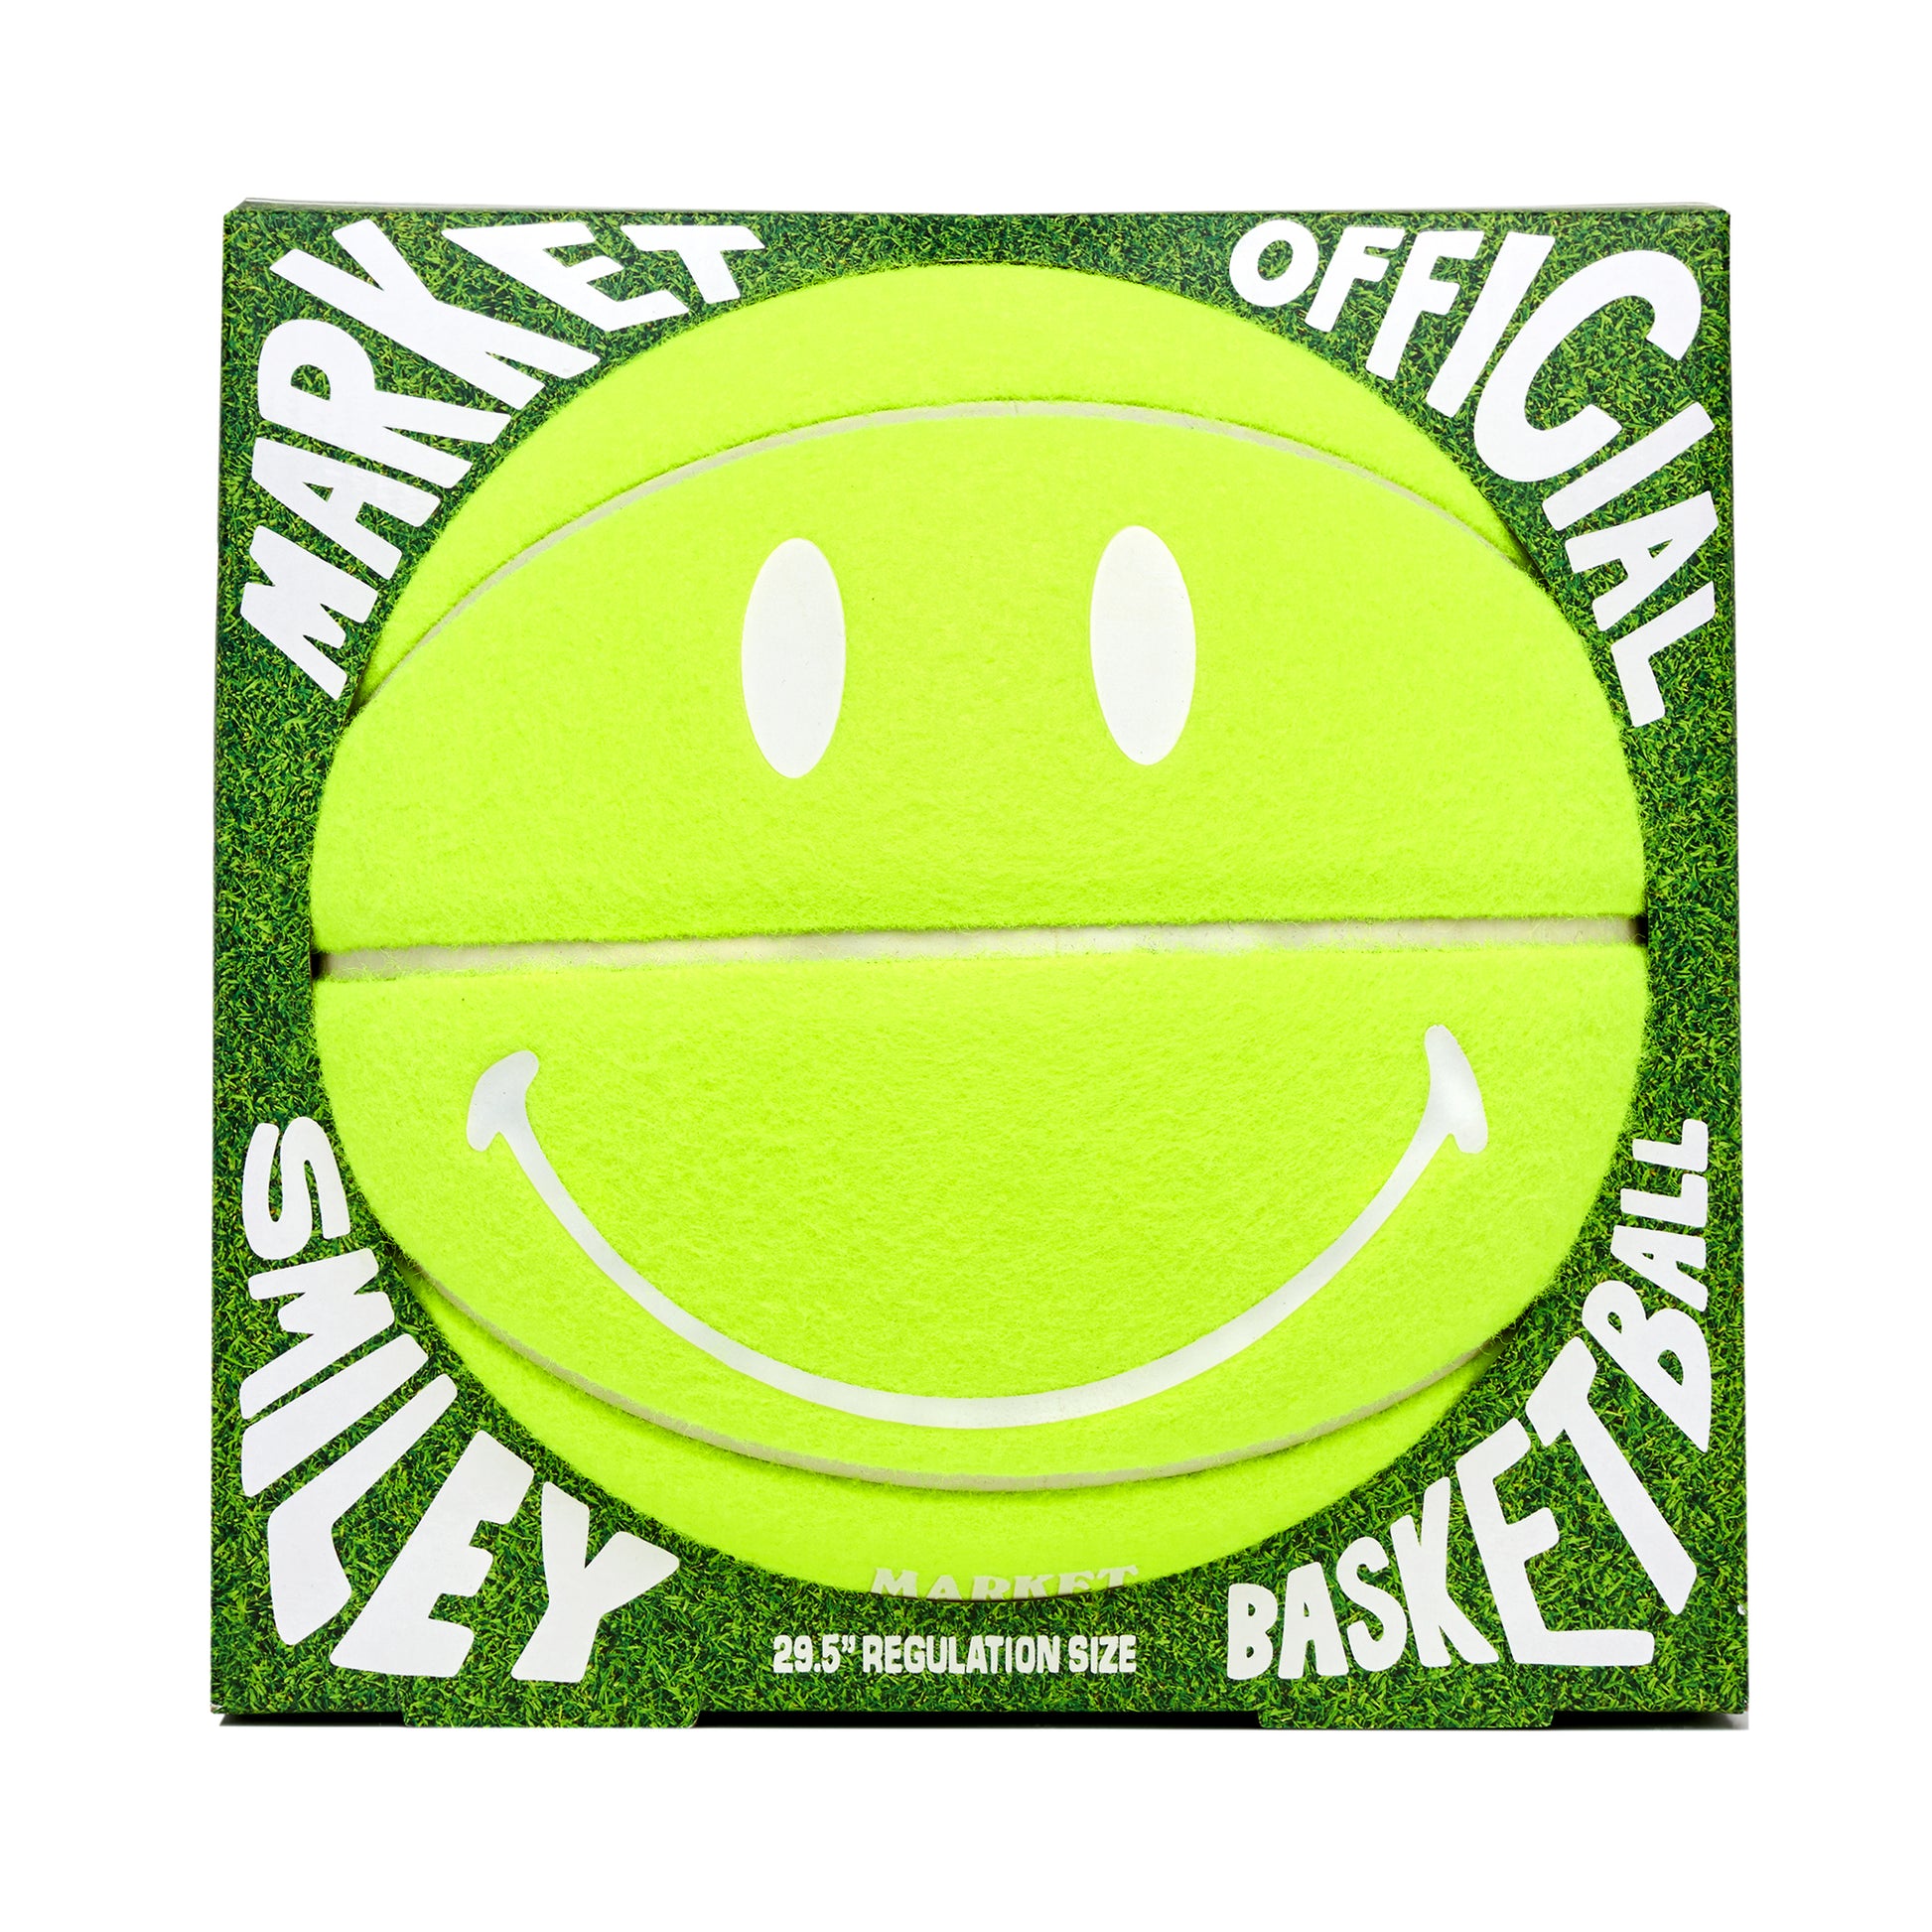 MARKET clothing brand SMILEY TENNIS BASKETBALL. Find more basketballs, sporting goods, homegoods and graphic tees at MarketStudios.com. Formally Chinatown Market.